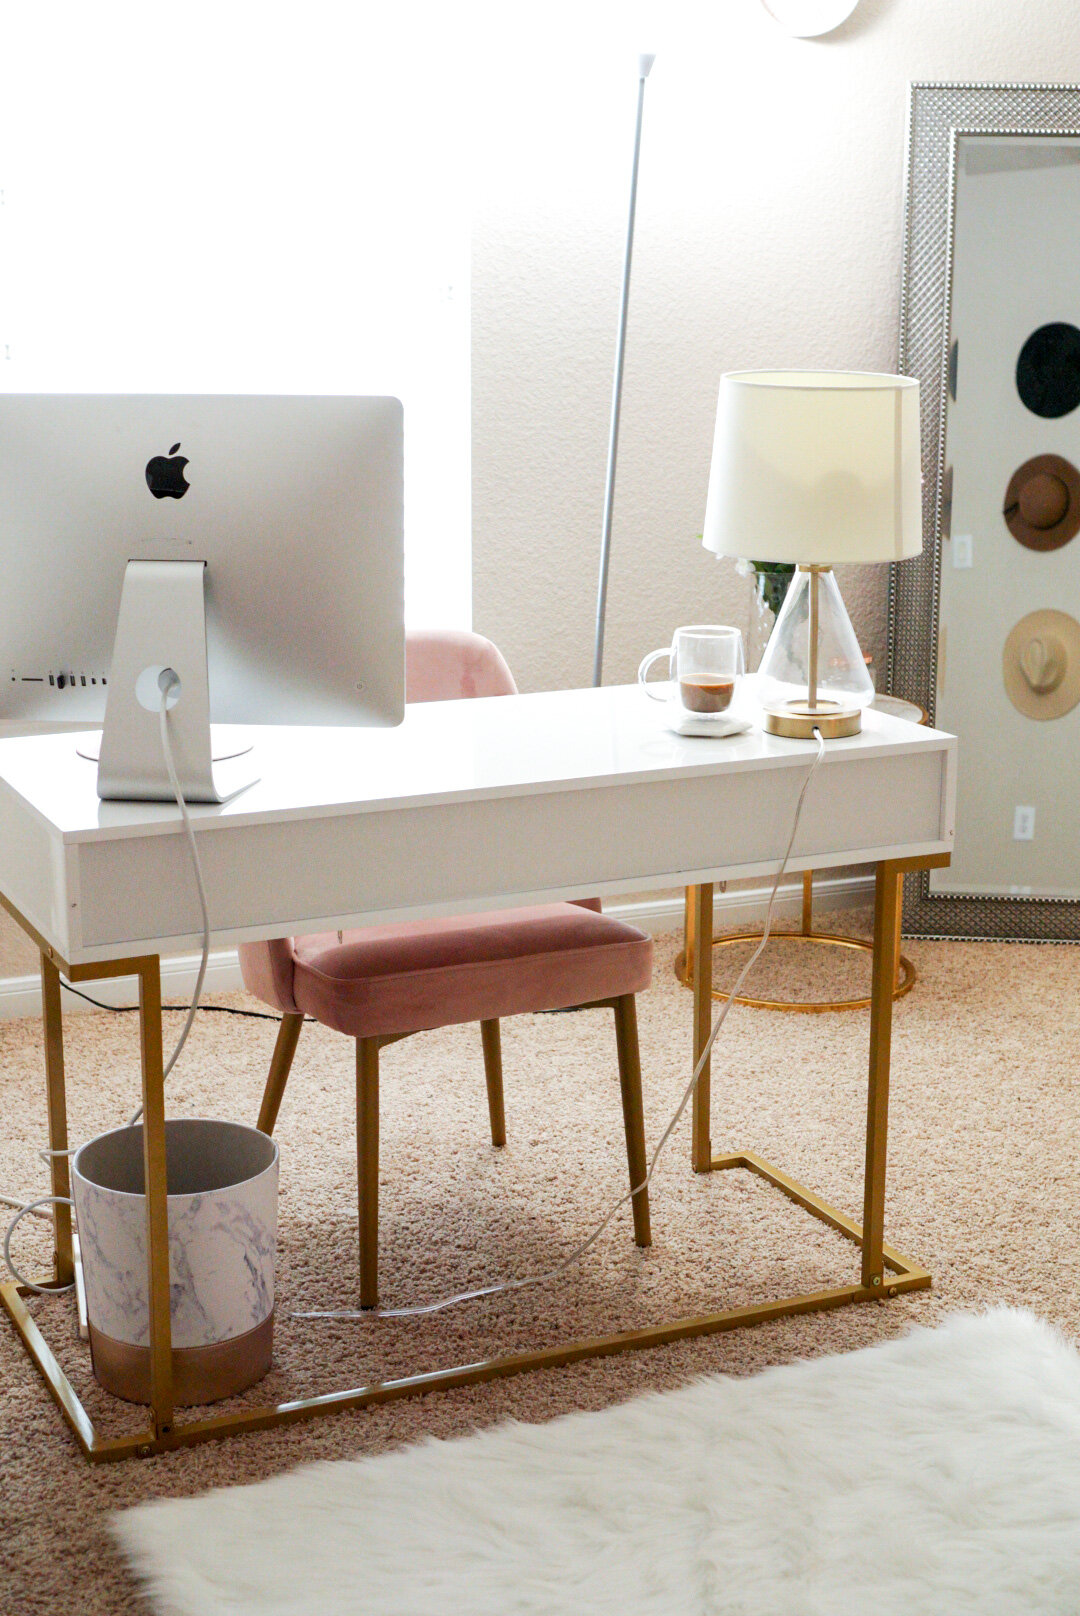 My Home Office Decor On a Budget — Avery Carrier